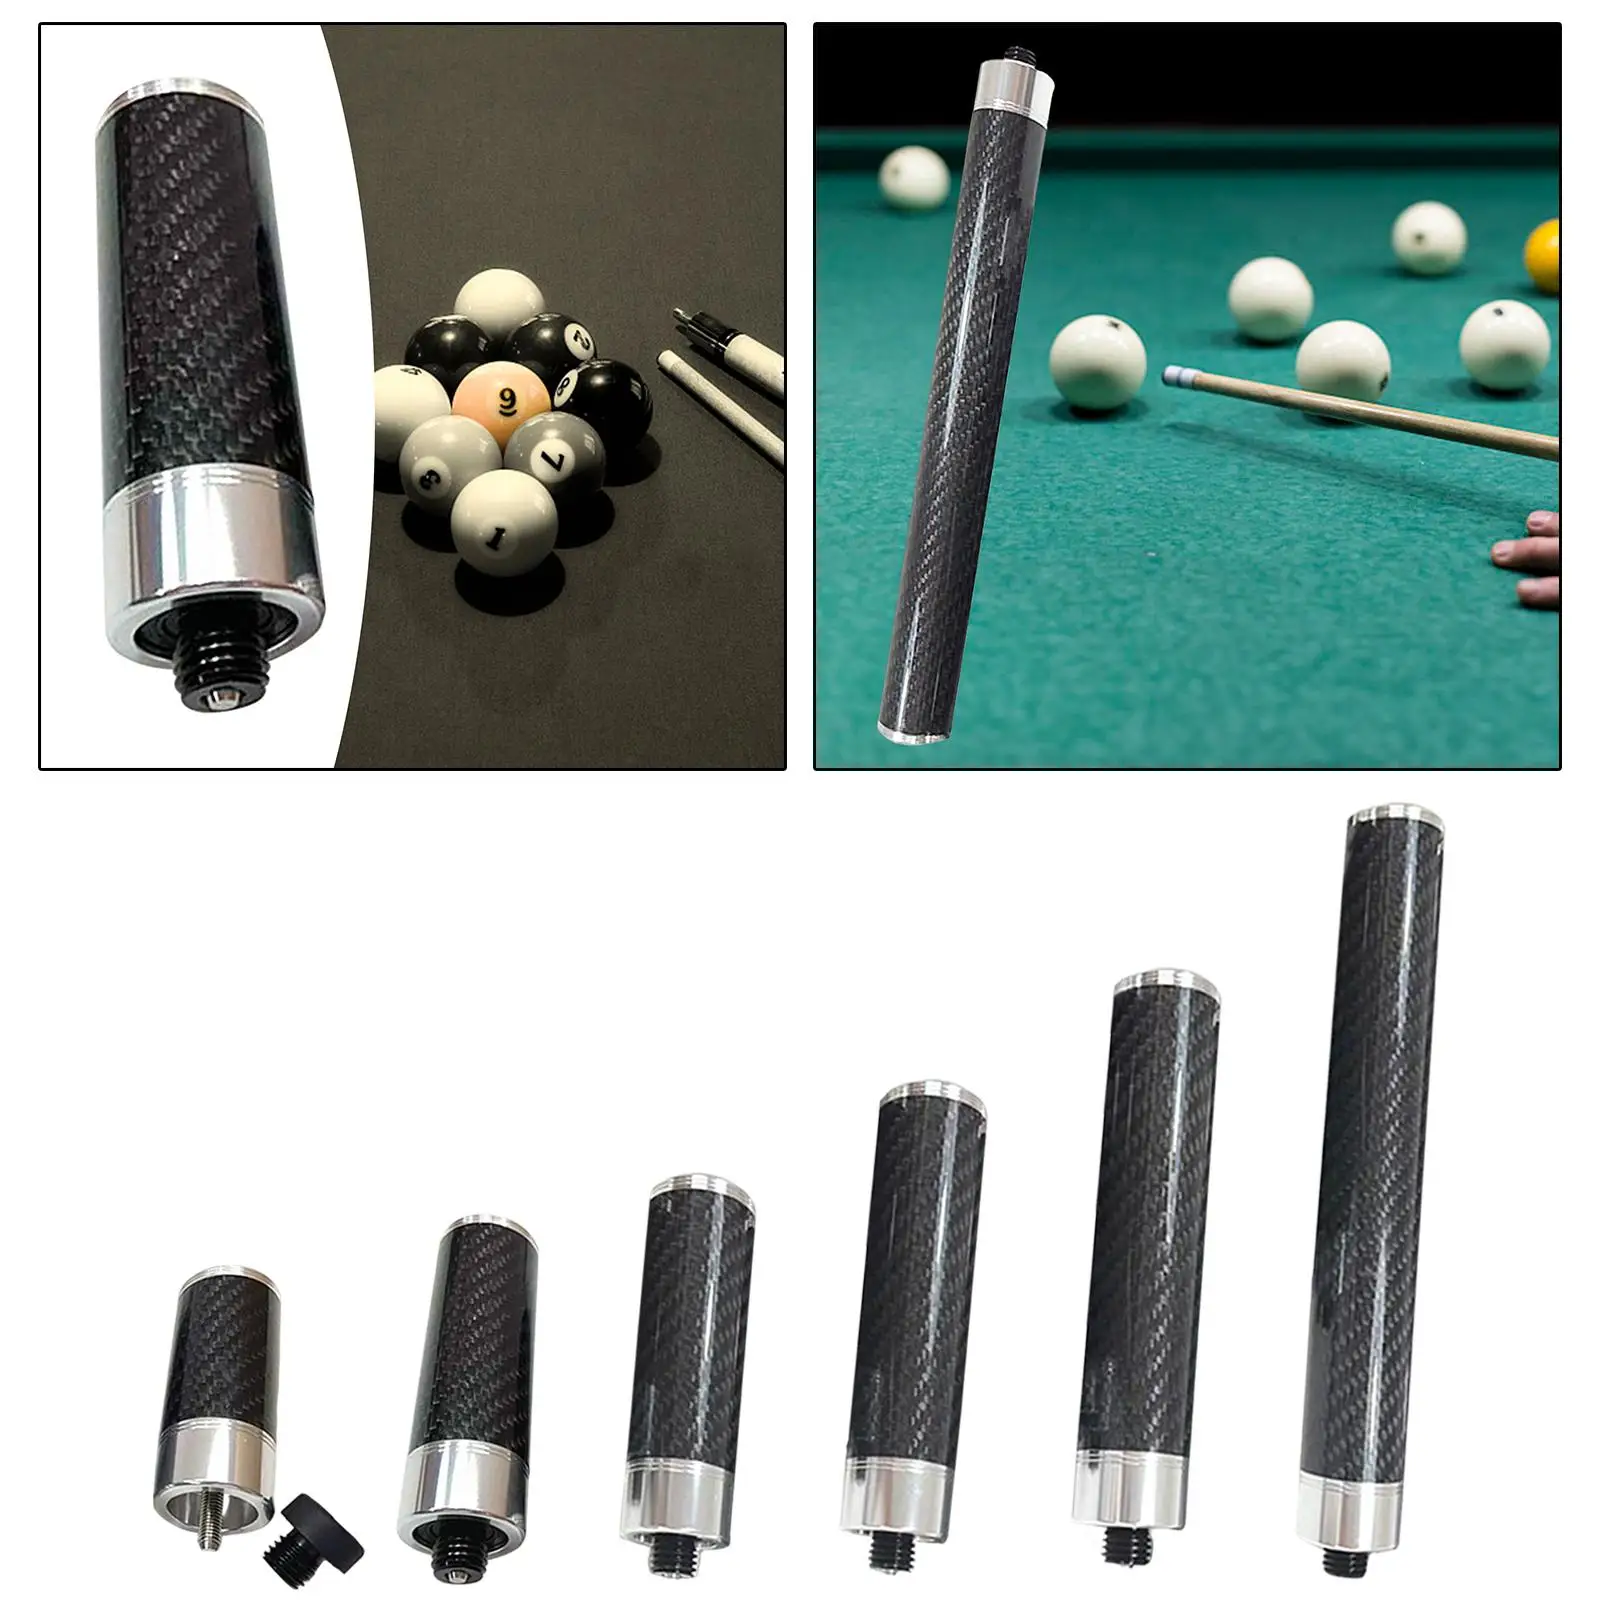 Snooker Cue Extension Billiards Pool Cue Stick Extended Dia 1.3 Inch Cue